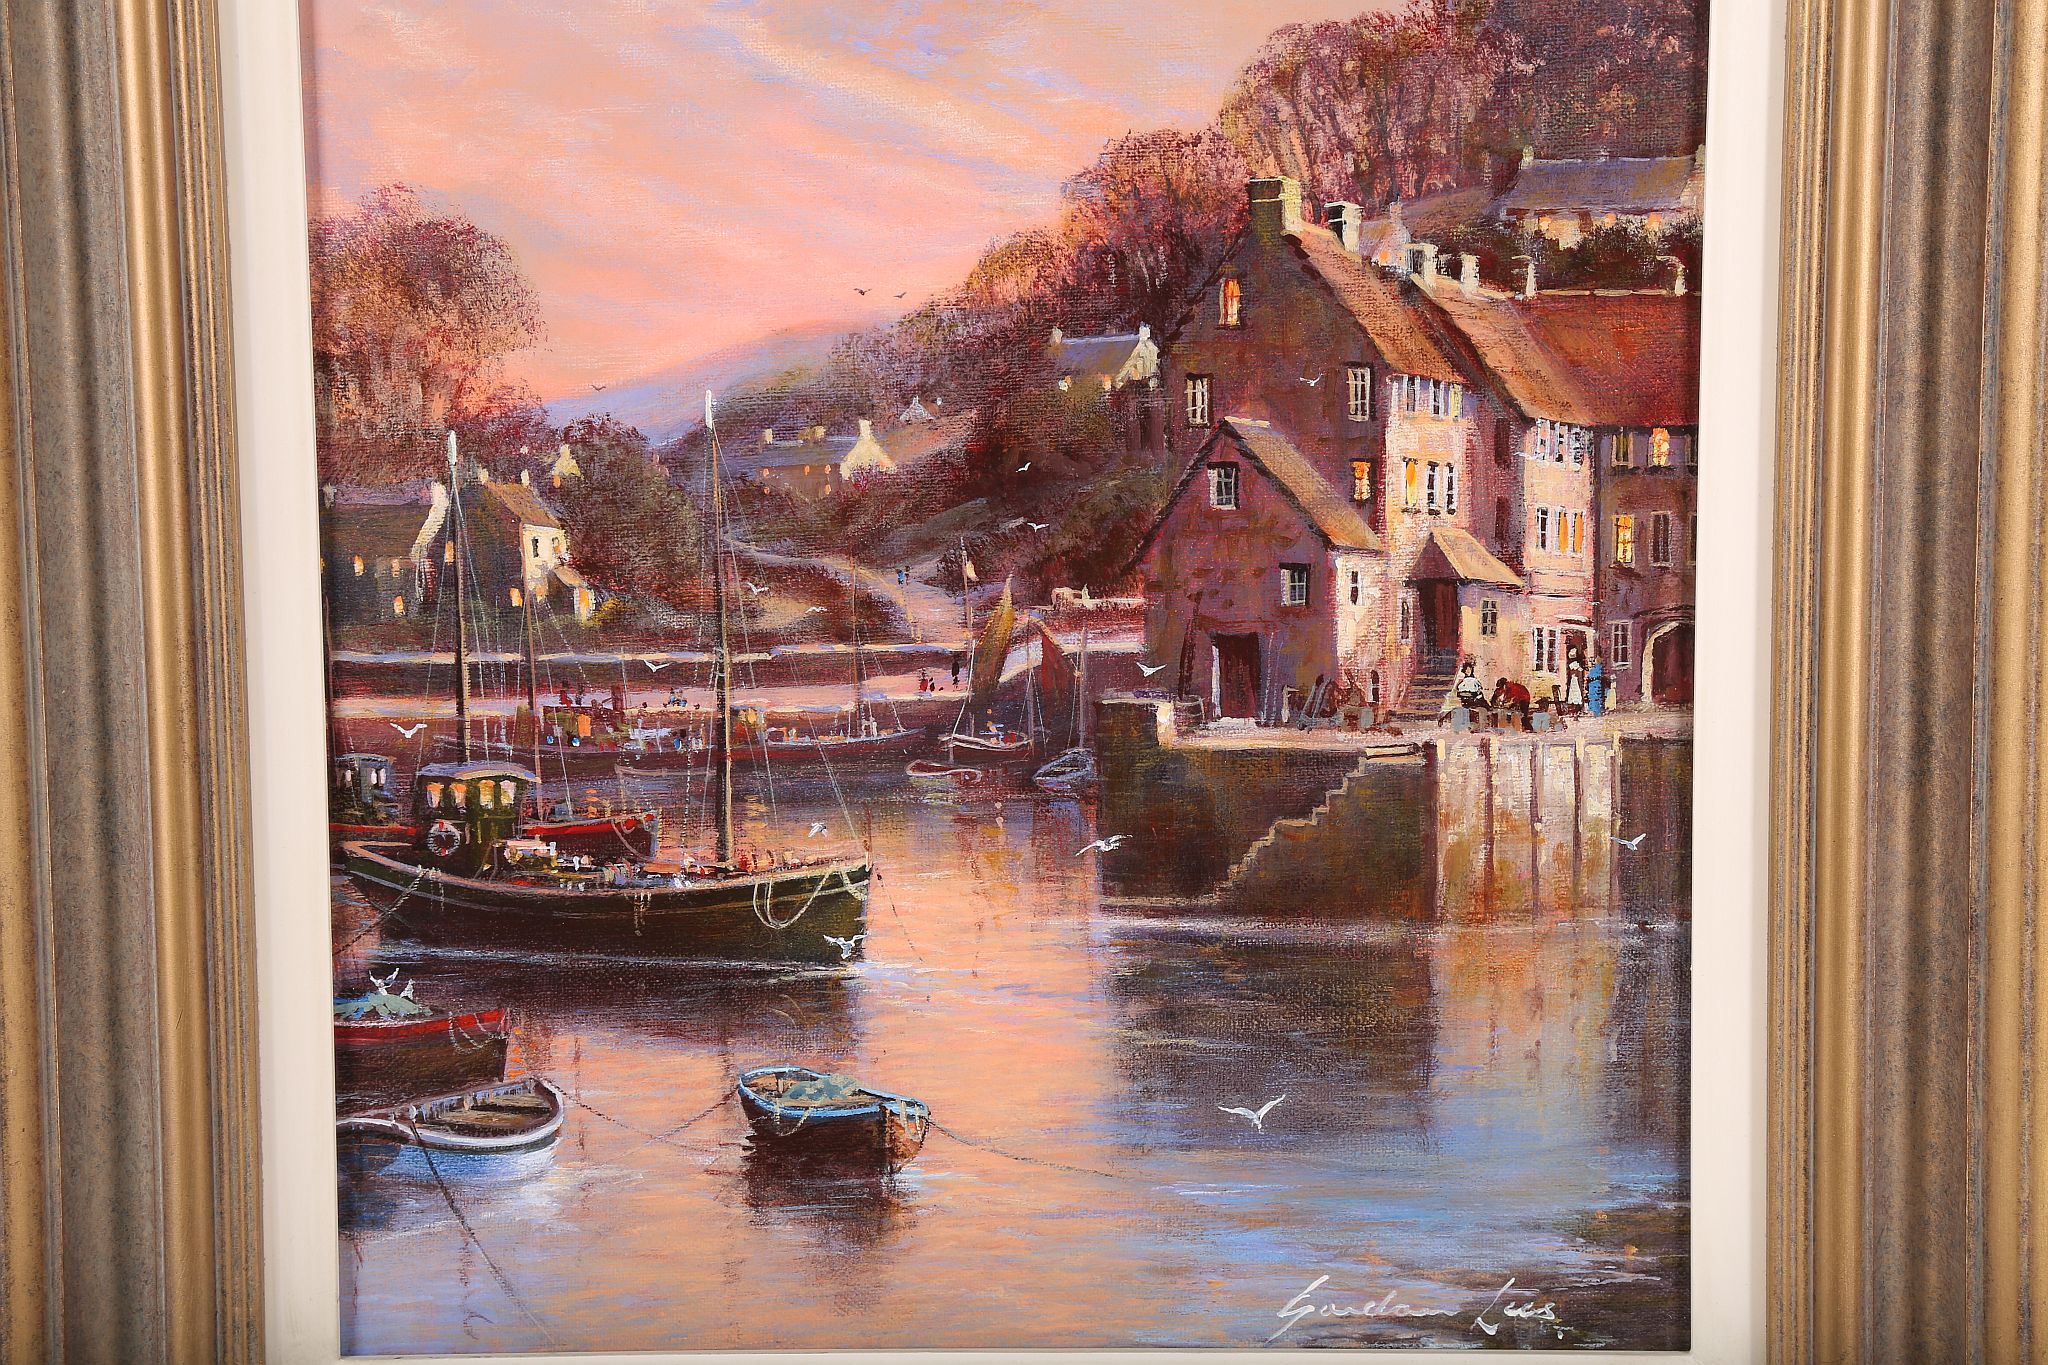 Gordon Lees, modern British school, English countryside with boats, possibly Cornwall fishing - Image 4 of 5